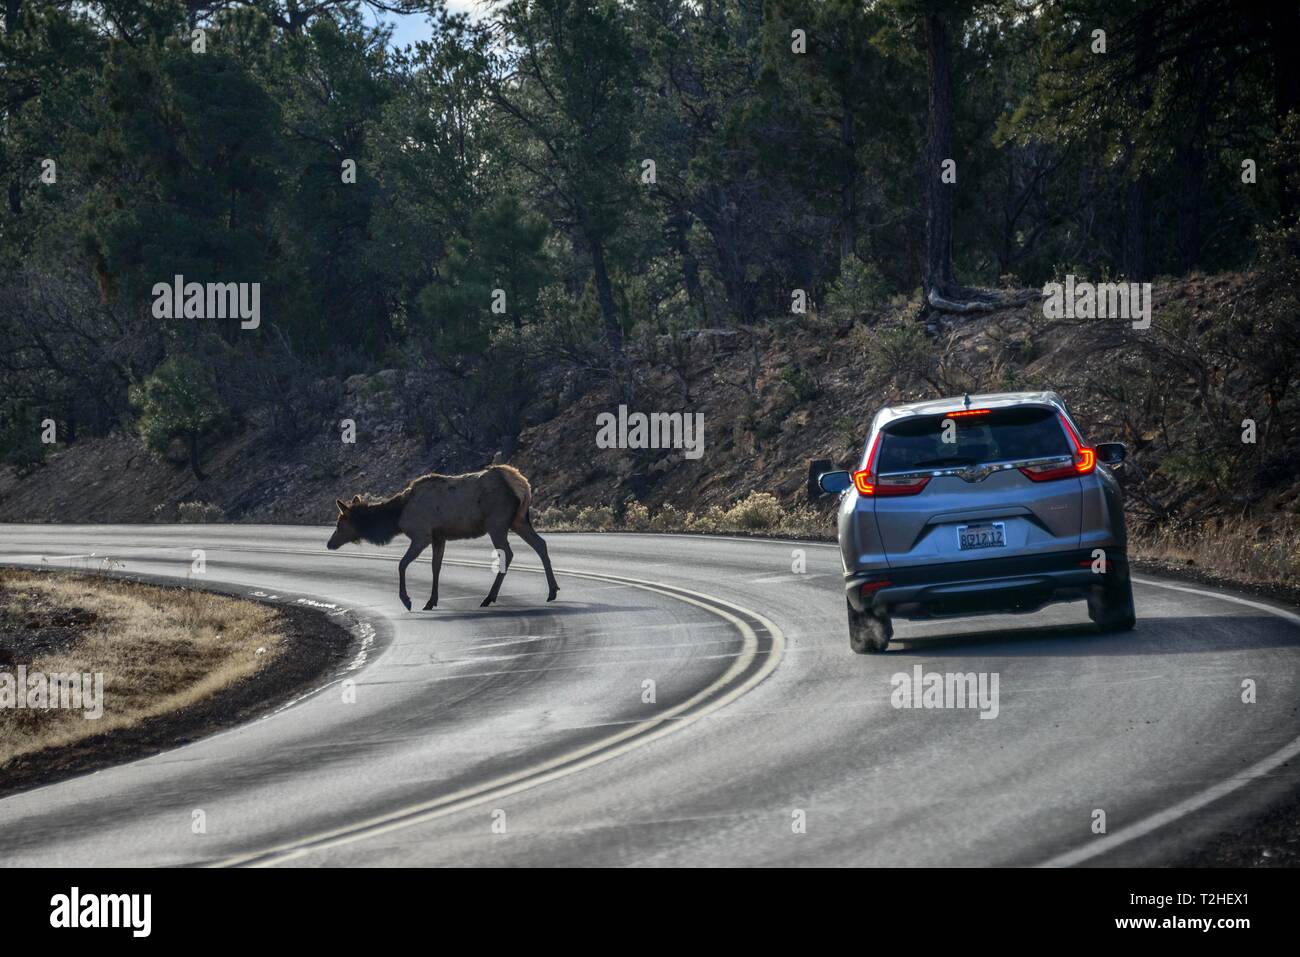 Car brakes on the road, american elk (Cervus canadensis) crosses a road in front of driving car, game pass, South Rim, Grand Canyon National Park Stock Photo